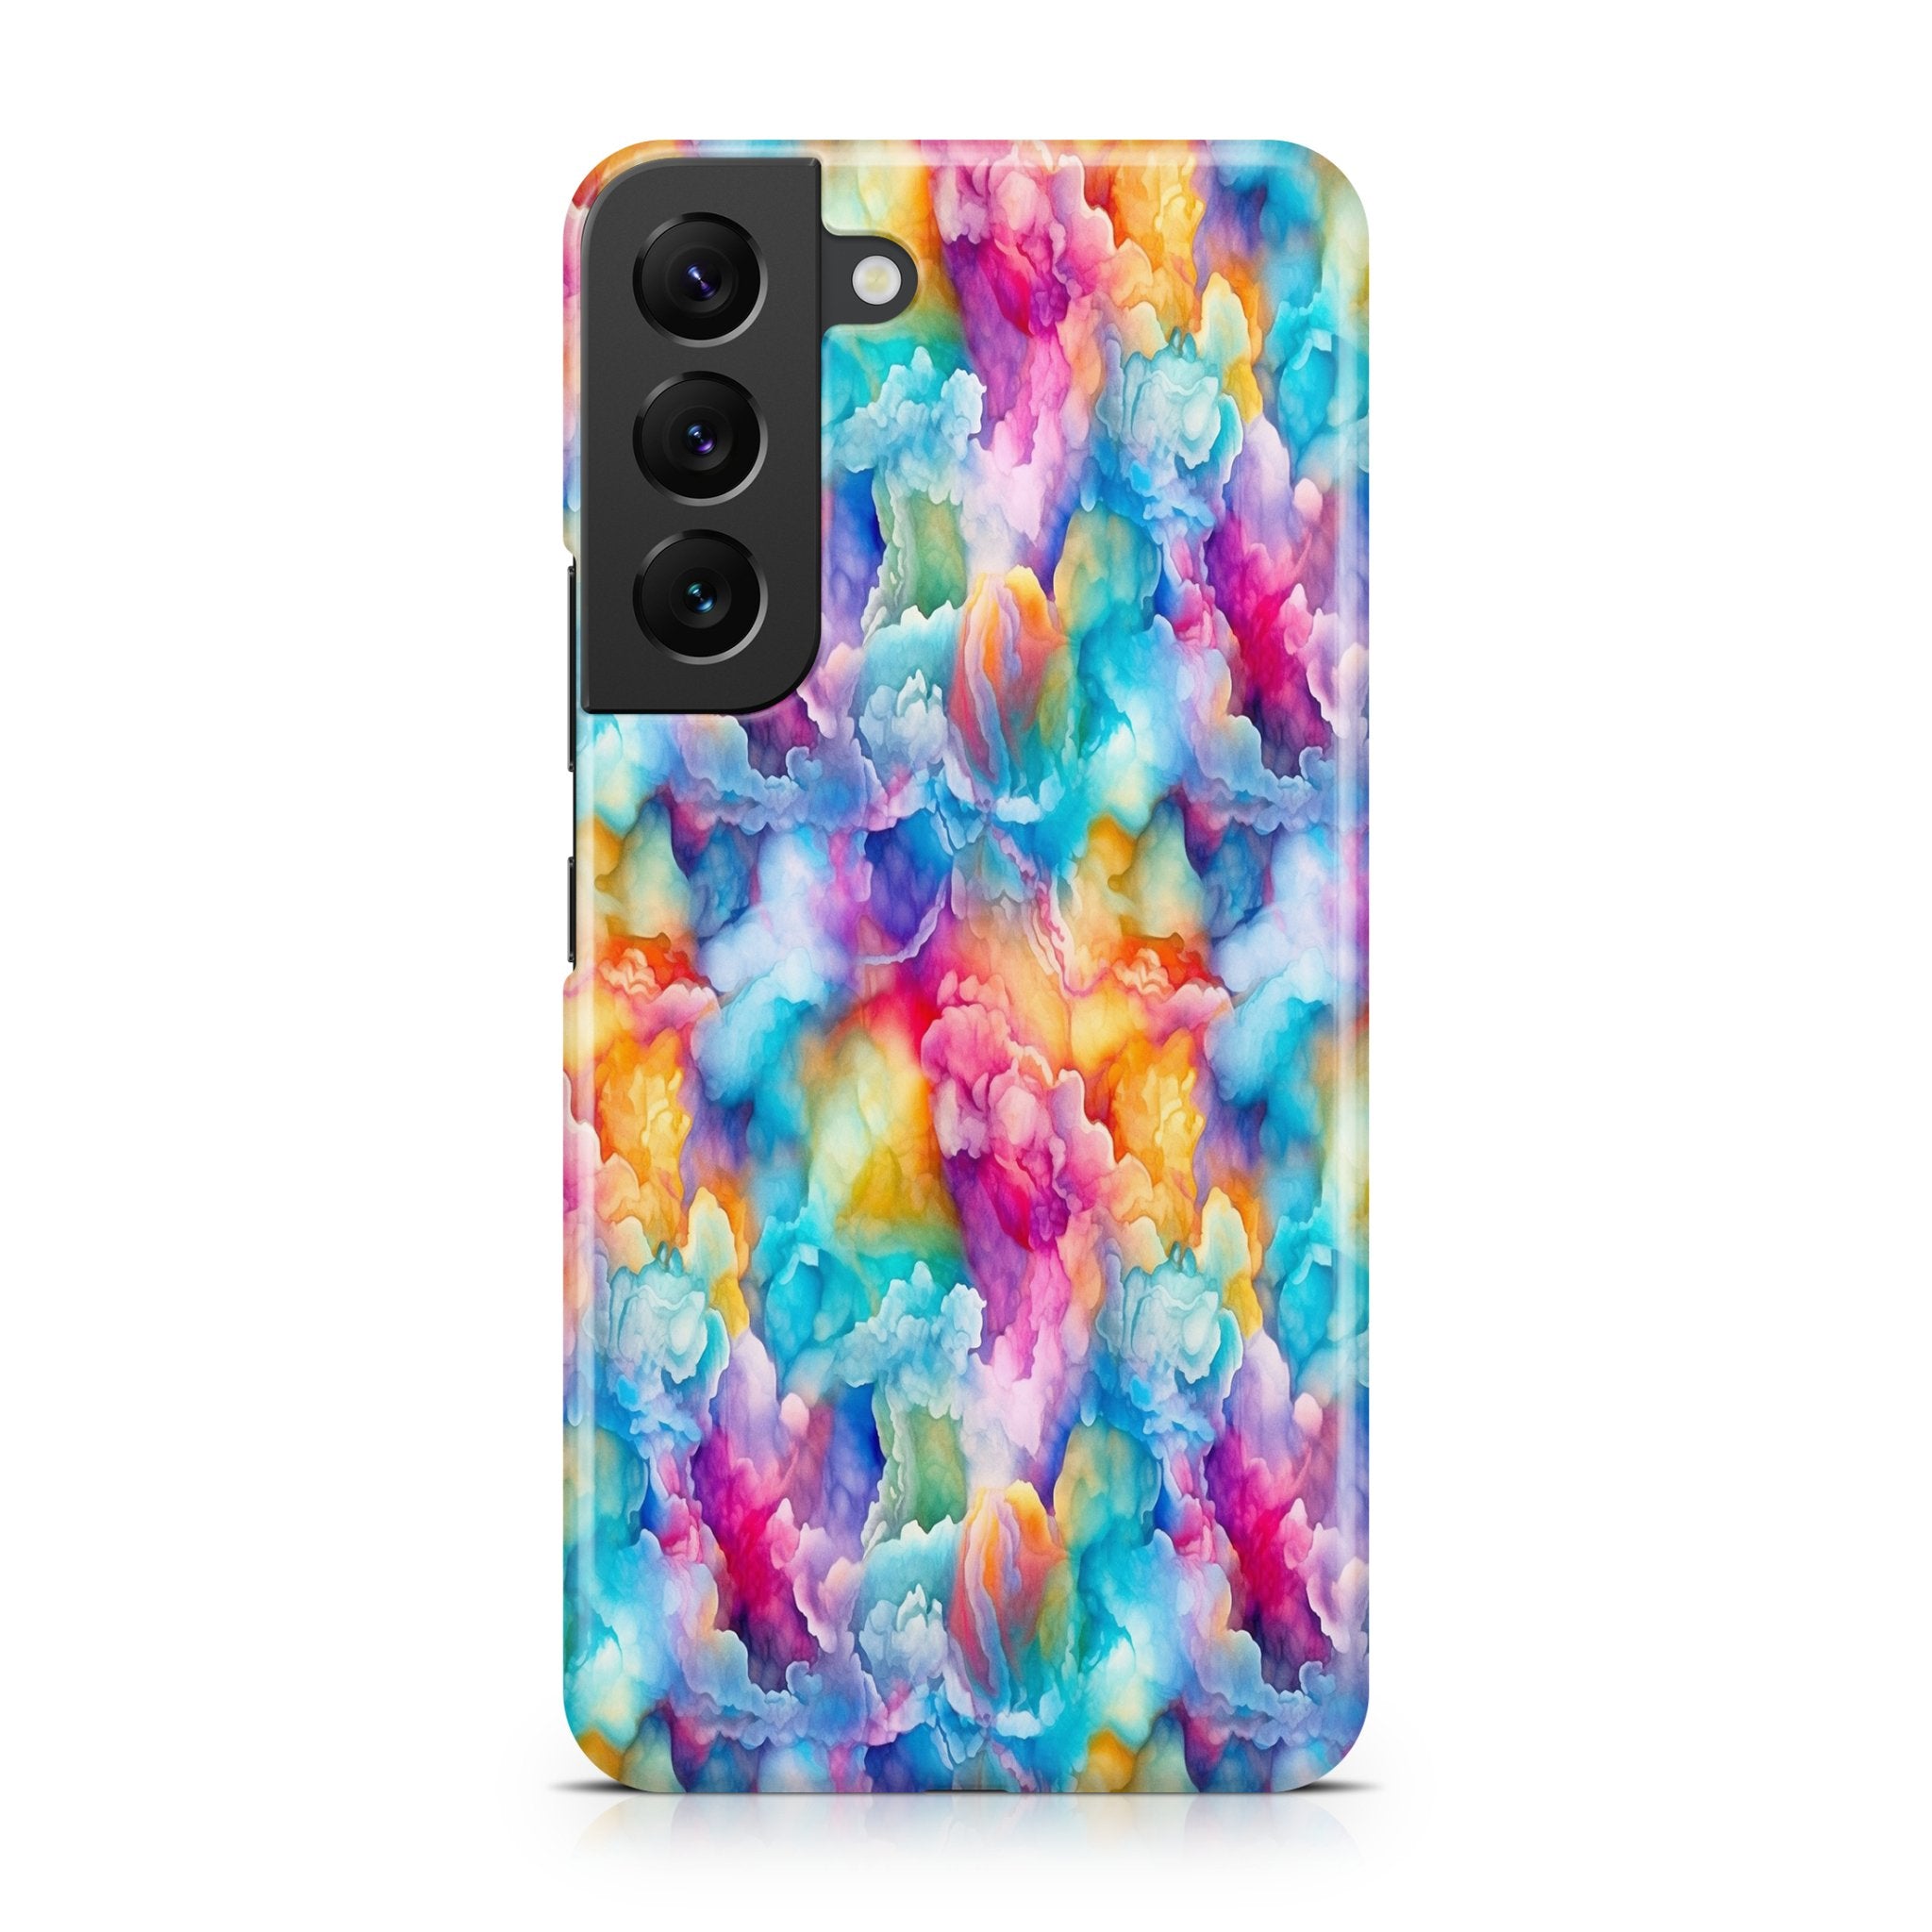 Cloudy Rainbow - Samsung phone case designs by CaseSwagger